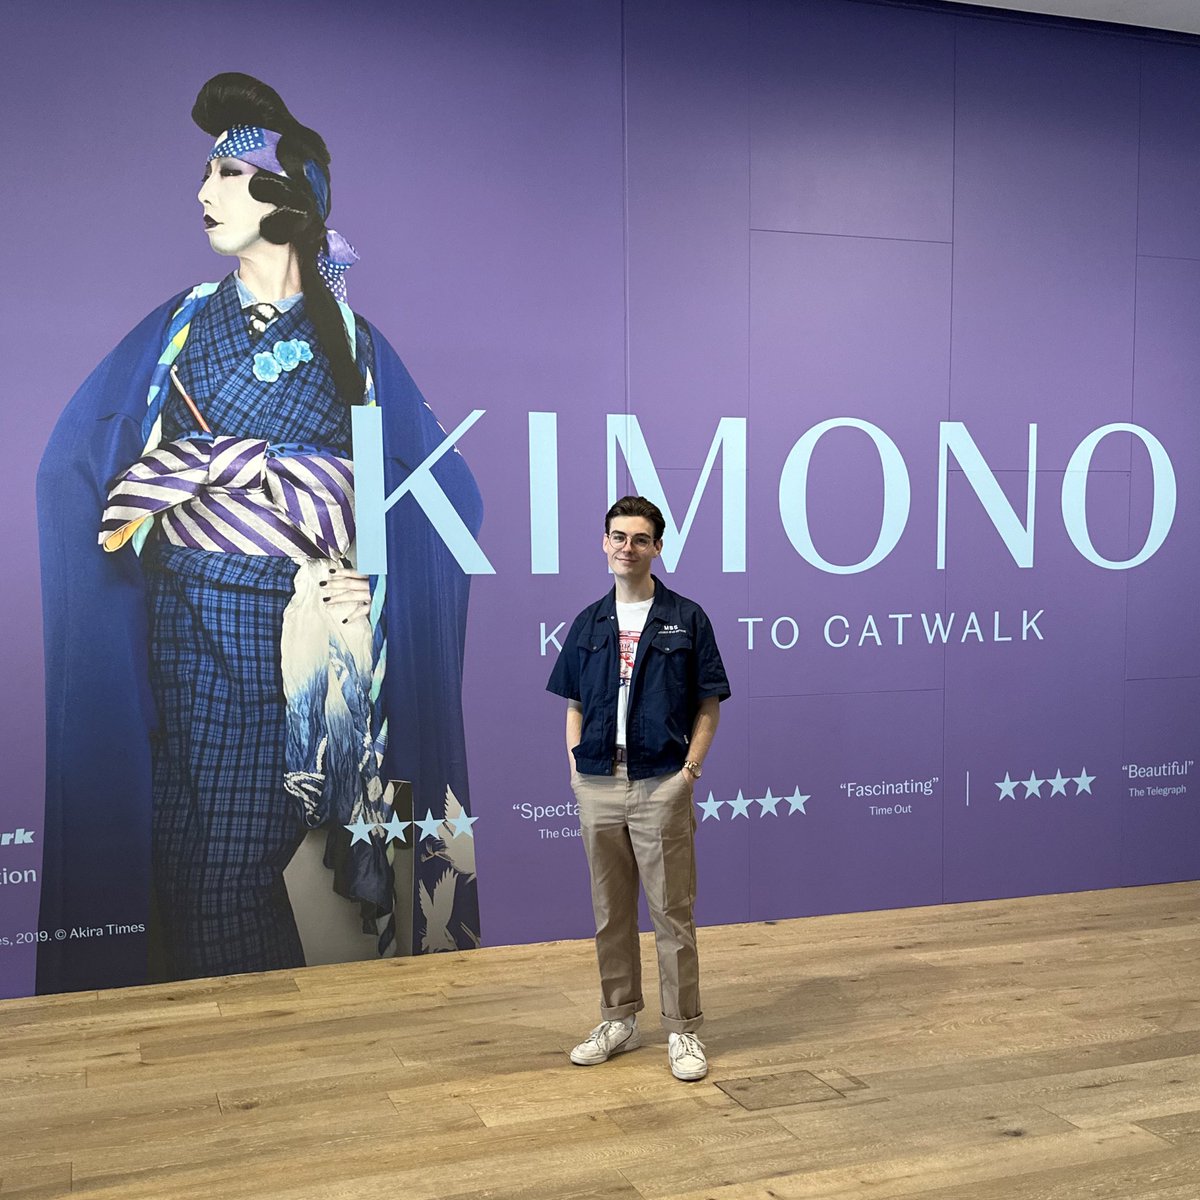 👘 The new Kimono exhibition at @VADundee is amazing - go see it!